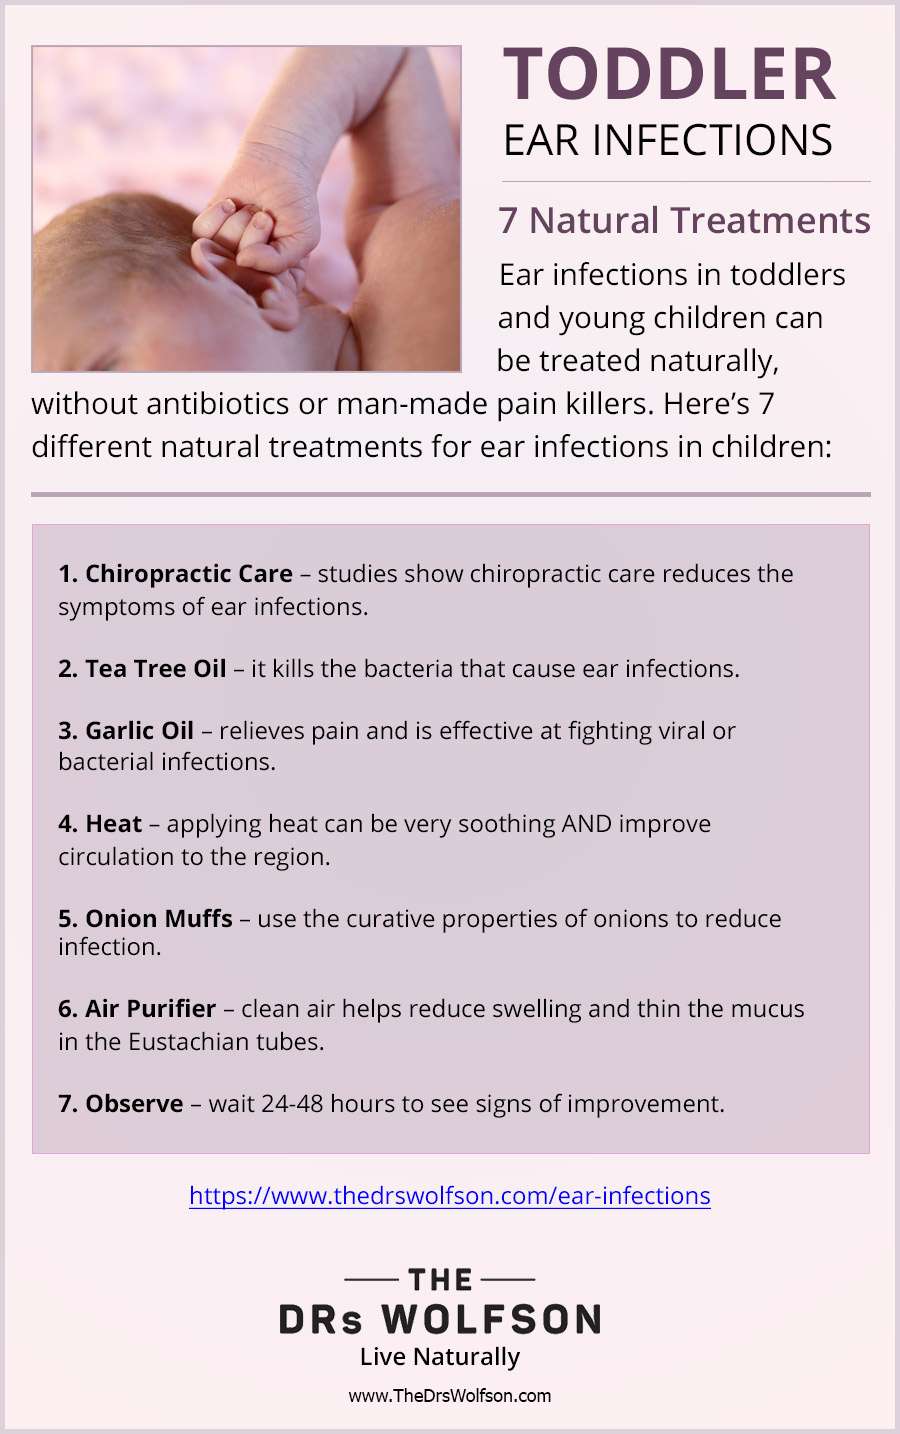 7 Natural Ways to Treat Ear Infections in Toddlers